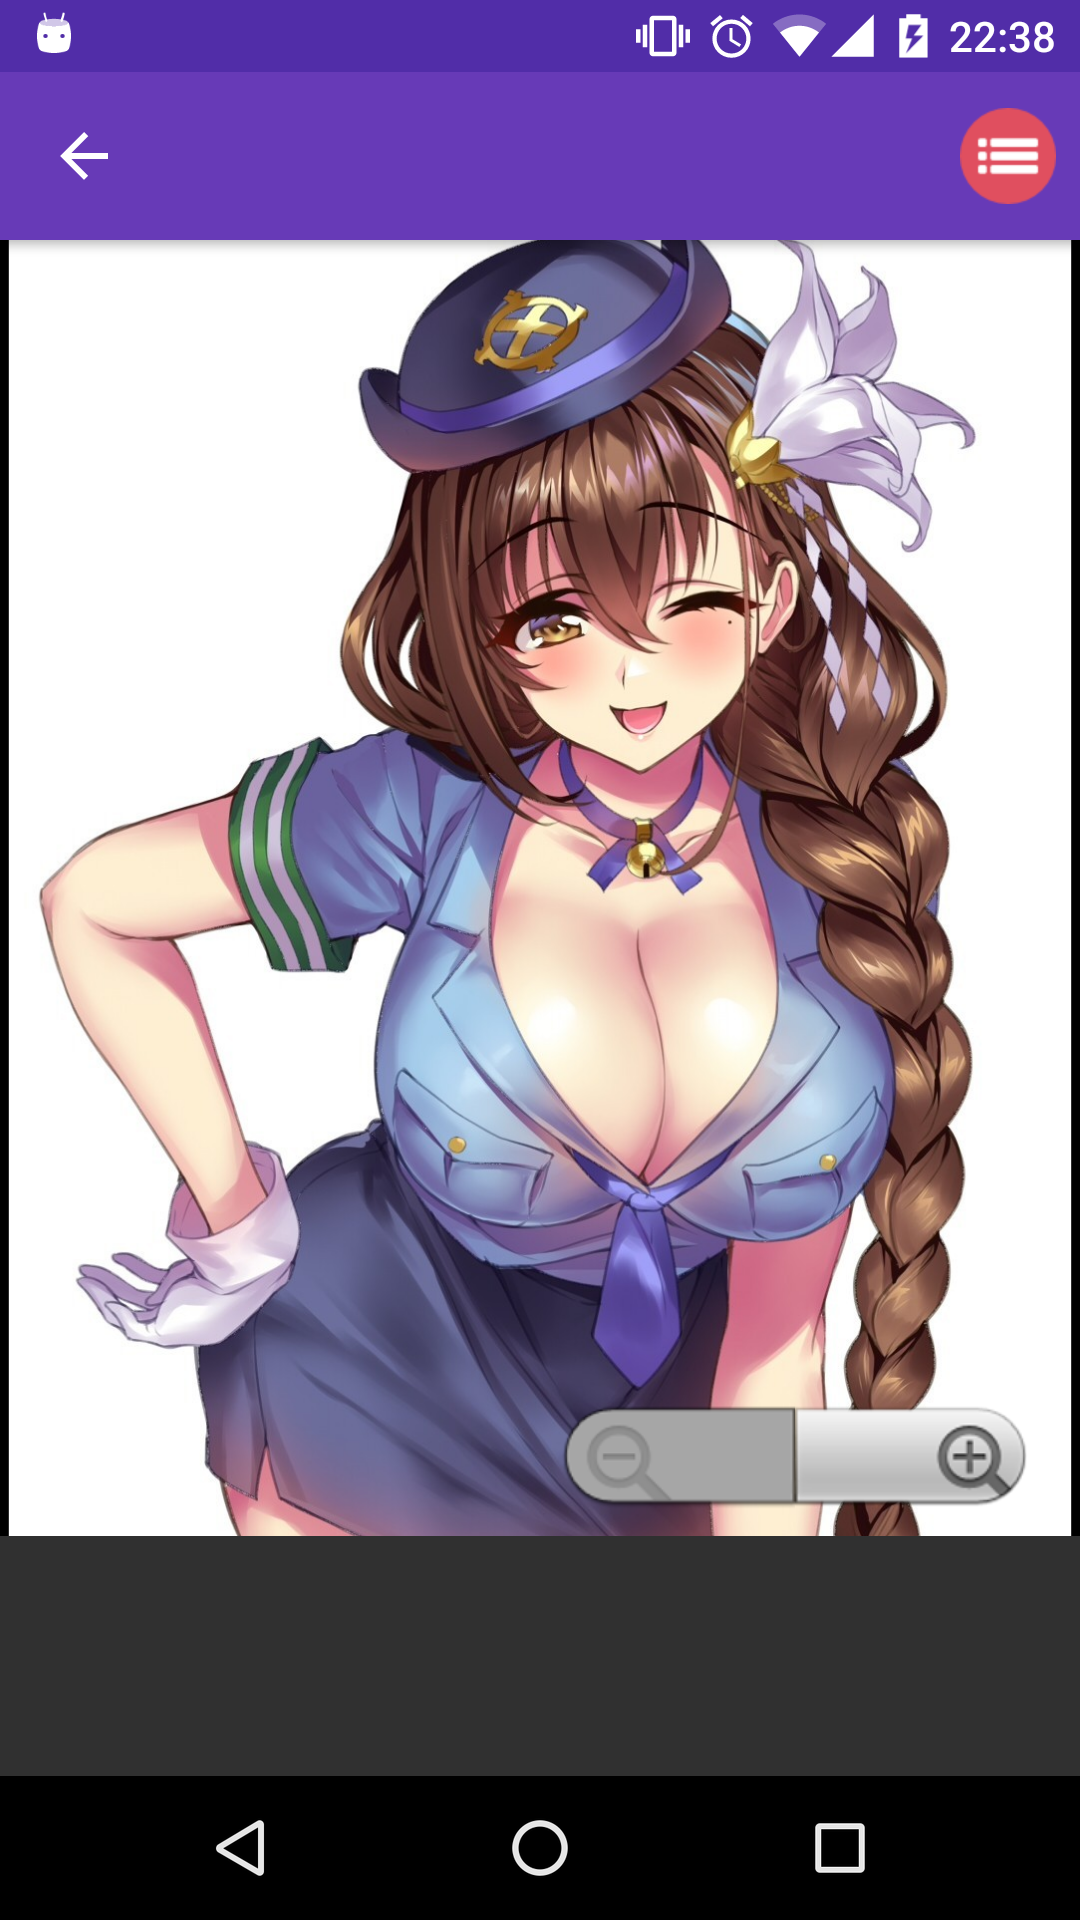 Anime Girls Backgrounds hentie,caprice,porn,panties,gallery,wallpapers,girls,photos,backgrounds,pic,sexy,apk,photo,hentai,and,anime,strapon,sex,puzzles,manga,android,app,adult,apps,editor